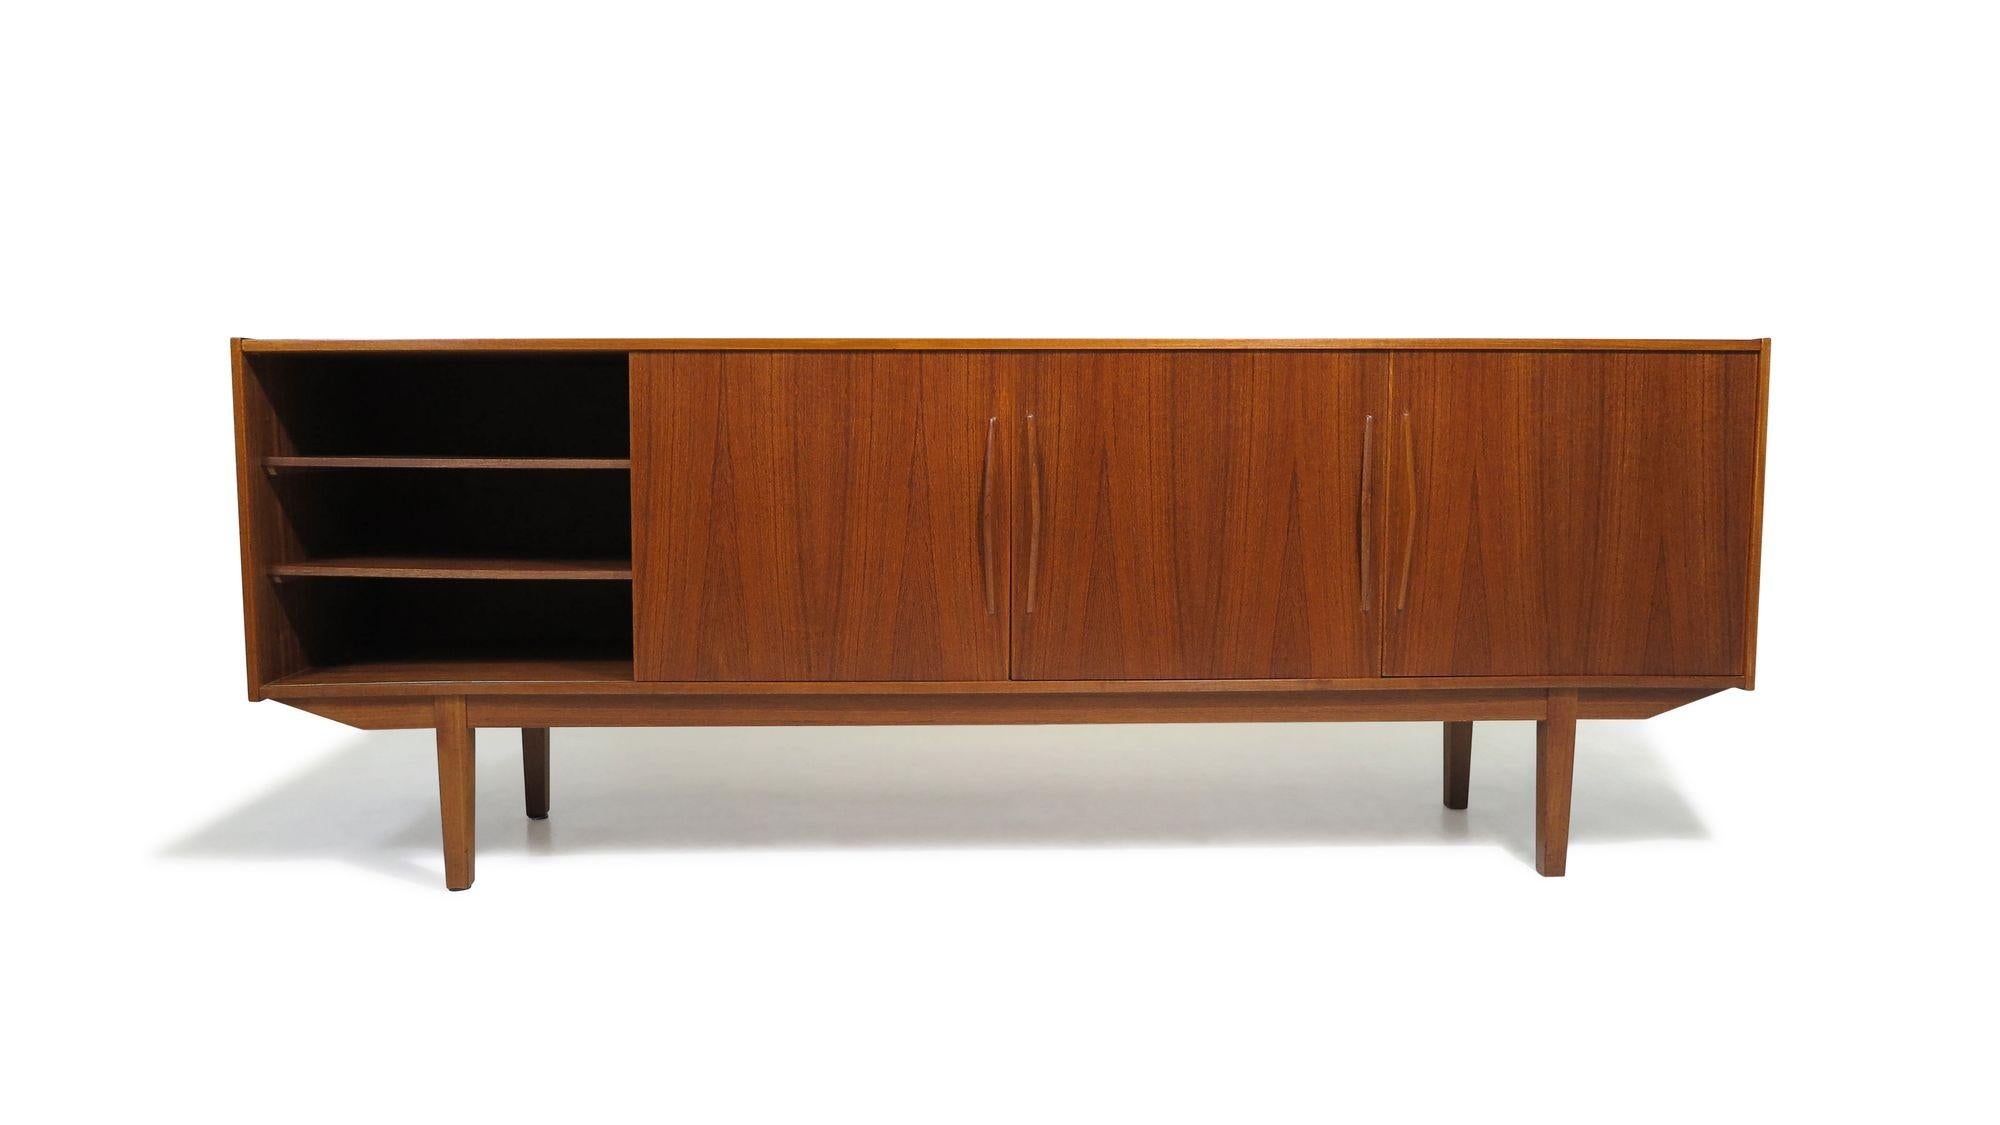 Oiled 1960's Mid-century Danish Teak Credenza with Doors and Drawers For Sale